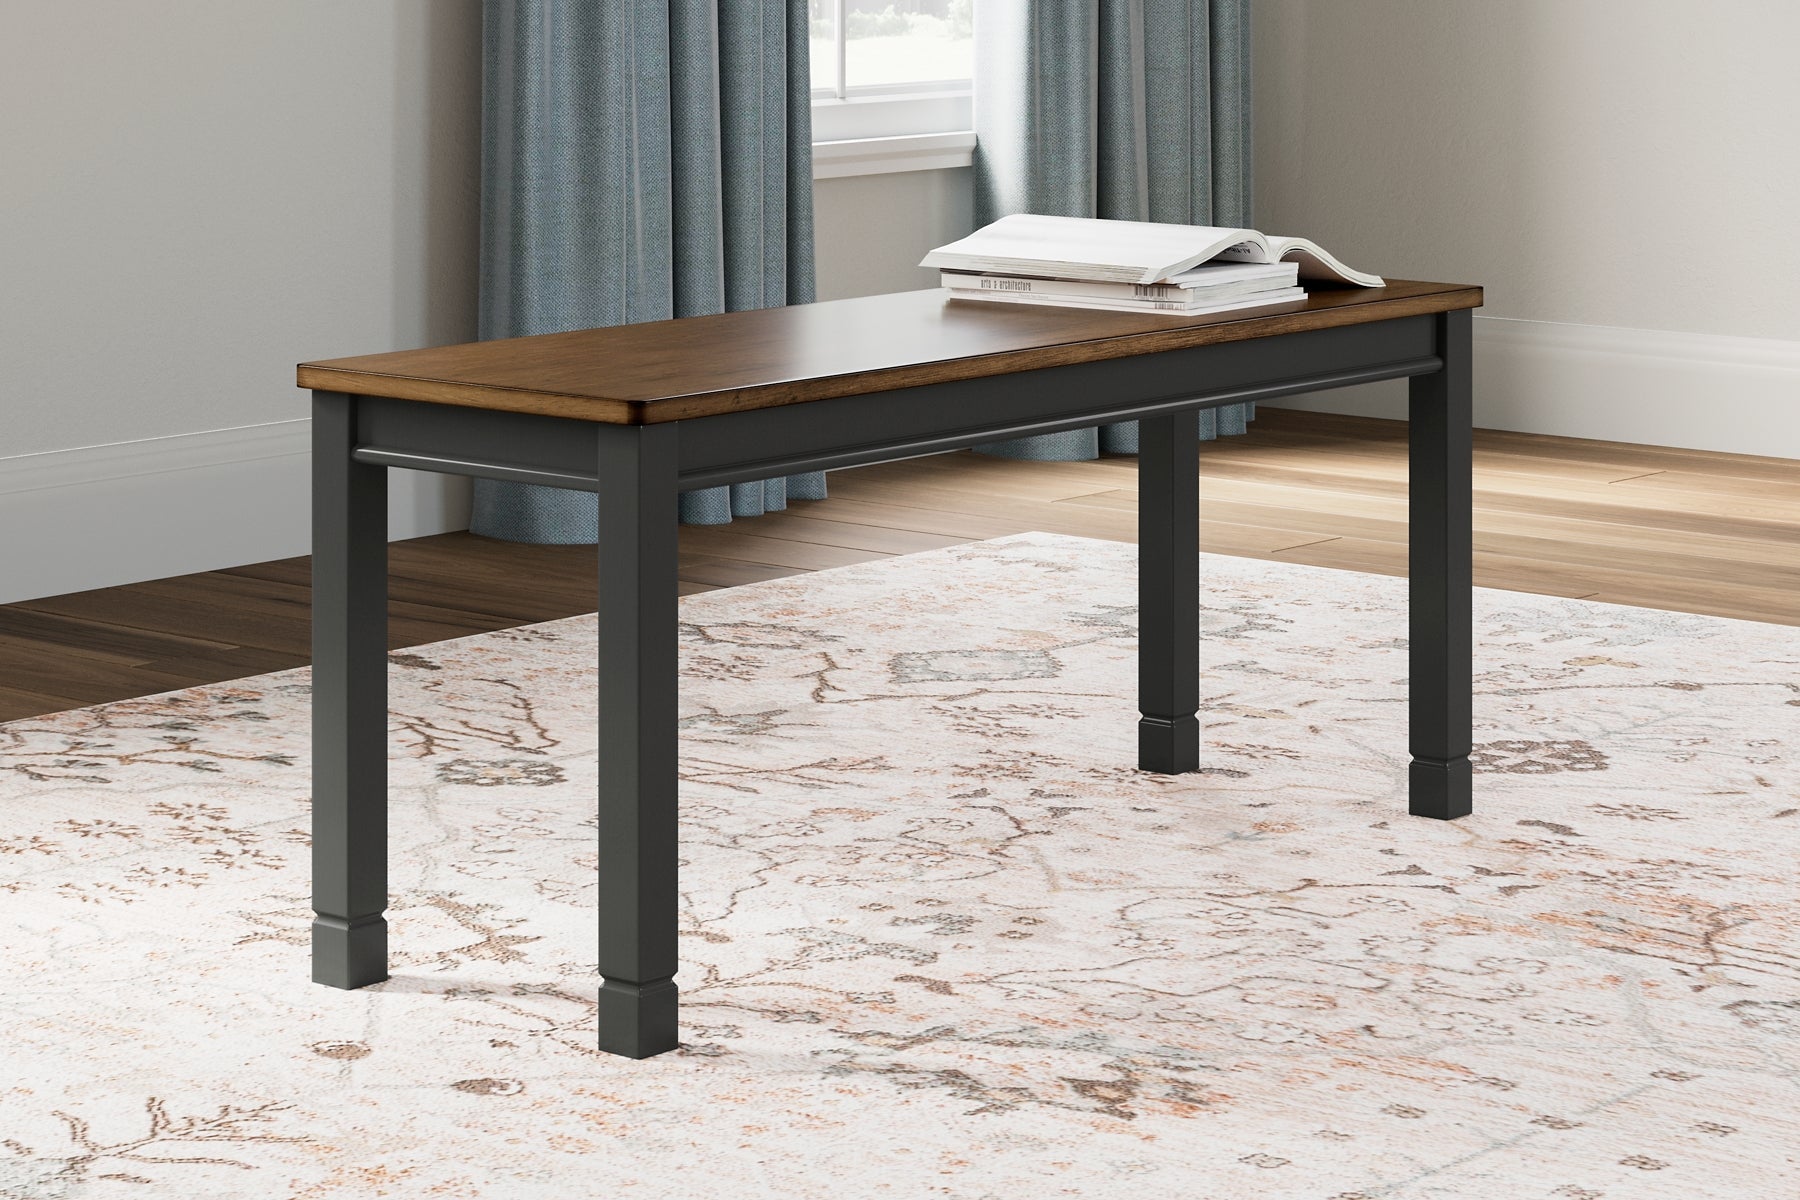 Owingsville Large Dining Room Bench at Cloud 9 Mattress & Furniture furniture, home furnishing, home decor